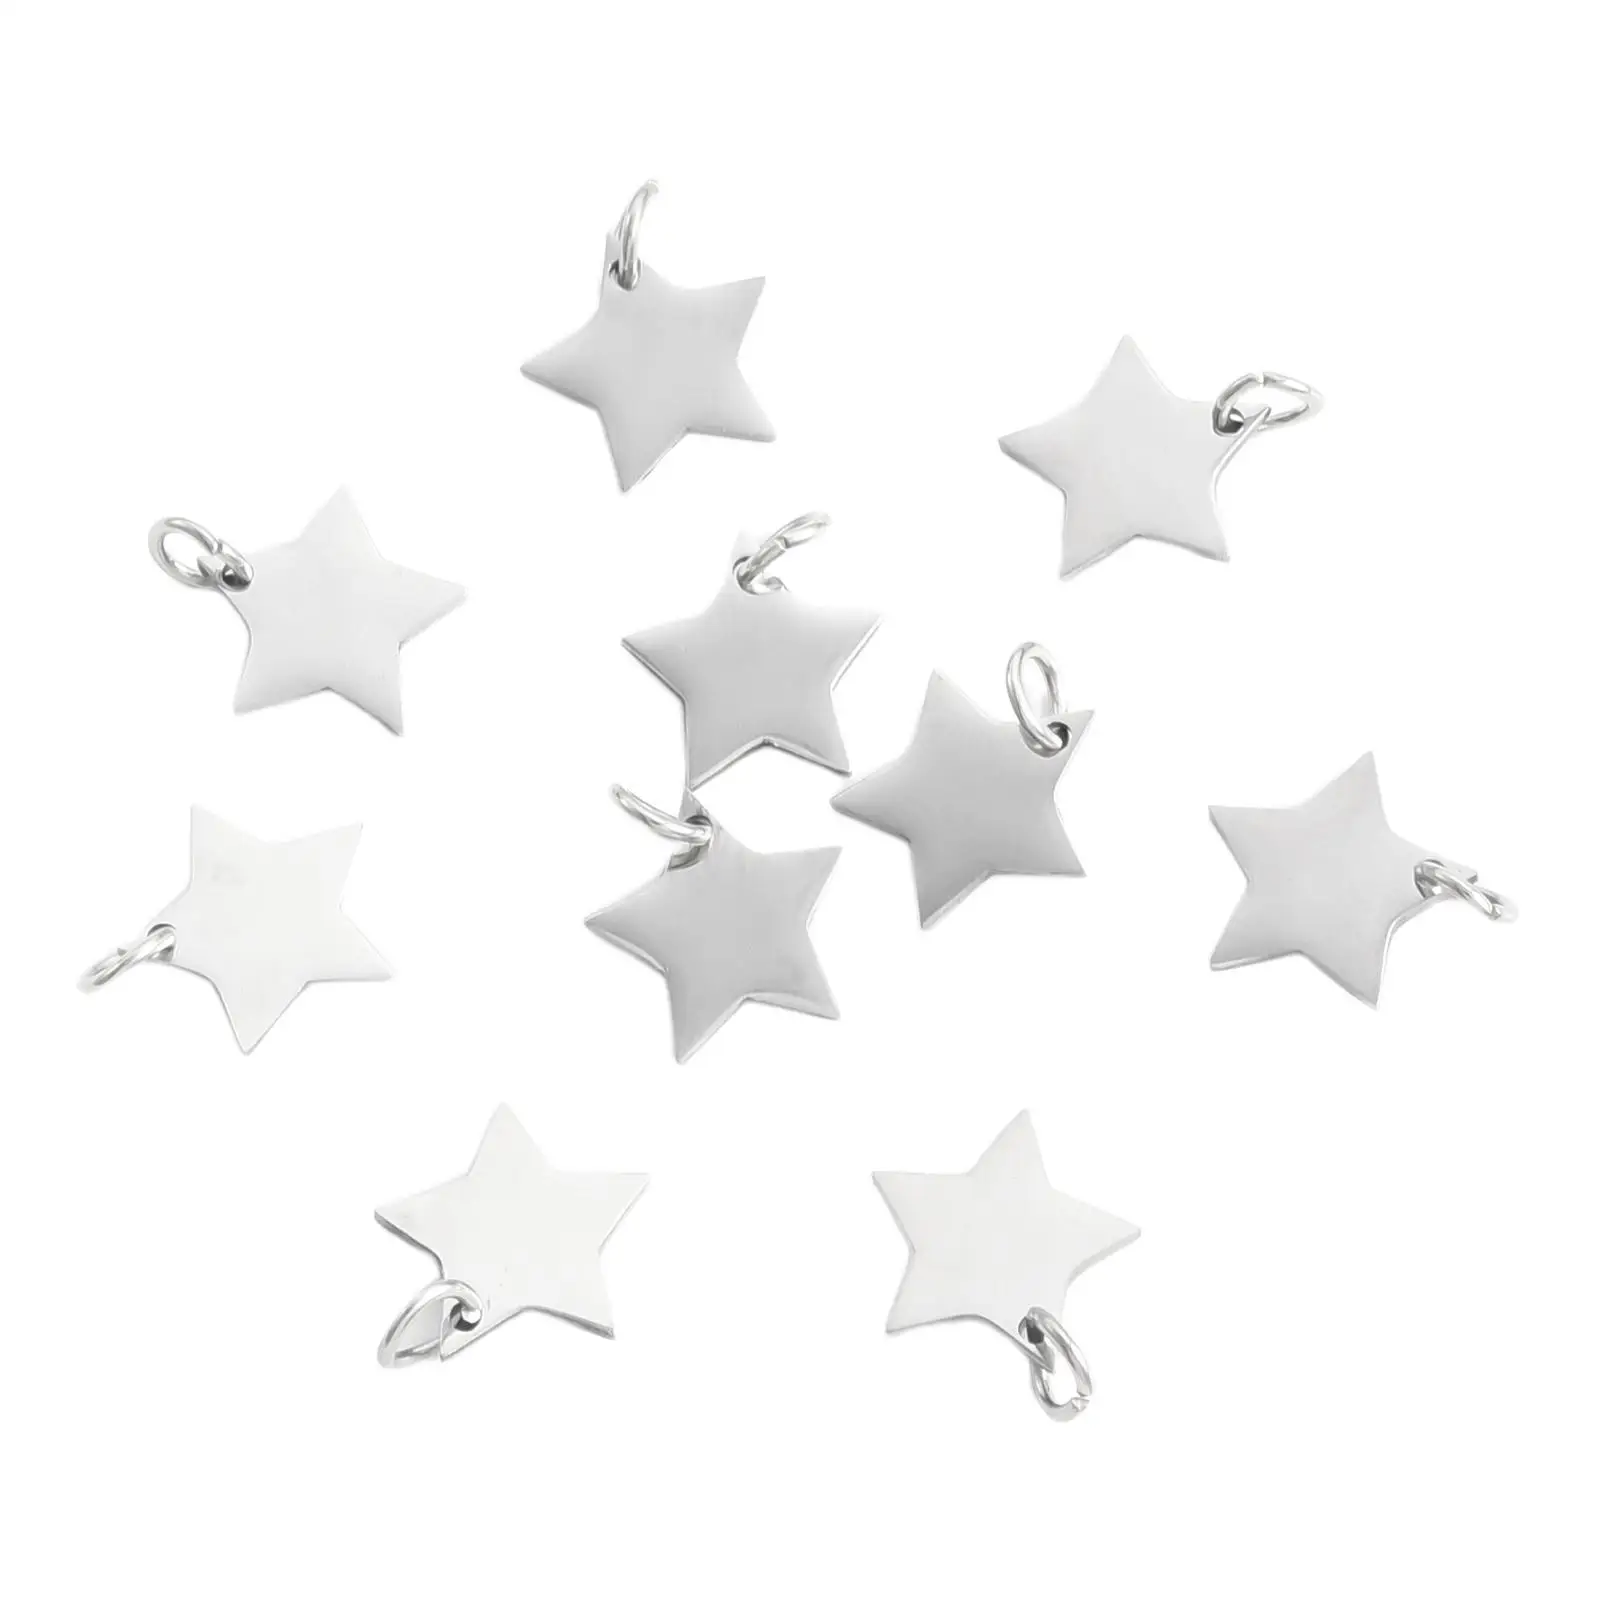 10pcs Five-Pointed Star DIY Pendant Accessories for Jewelry Making and Crafting